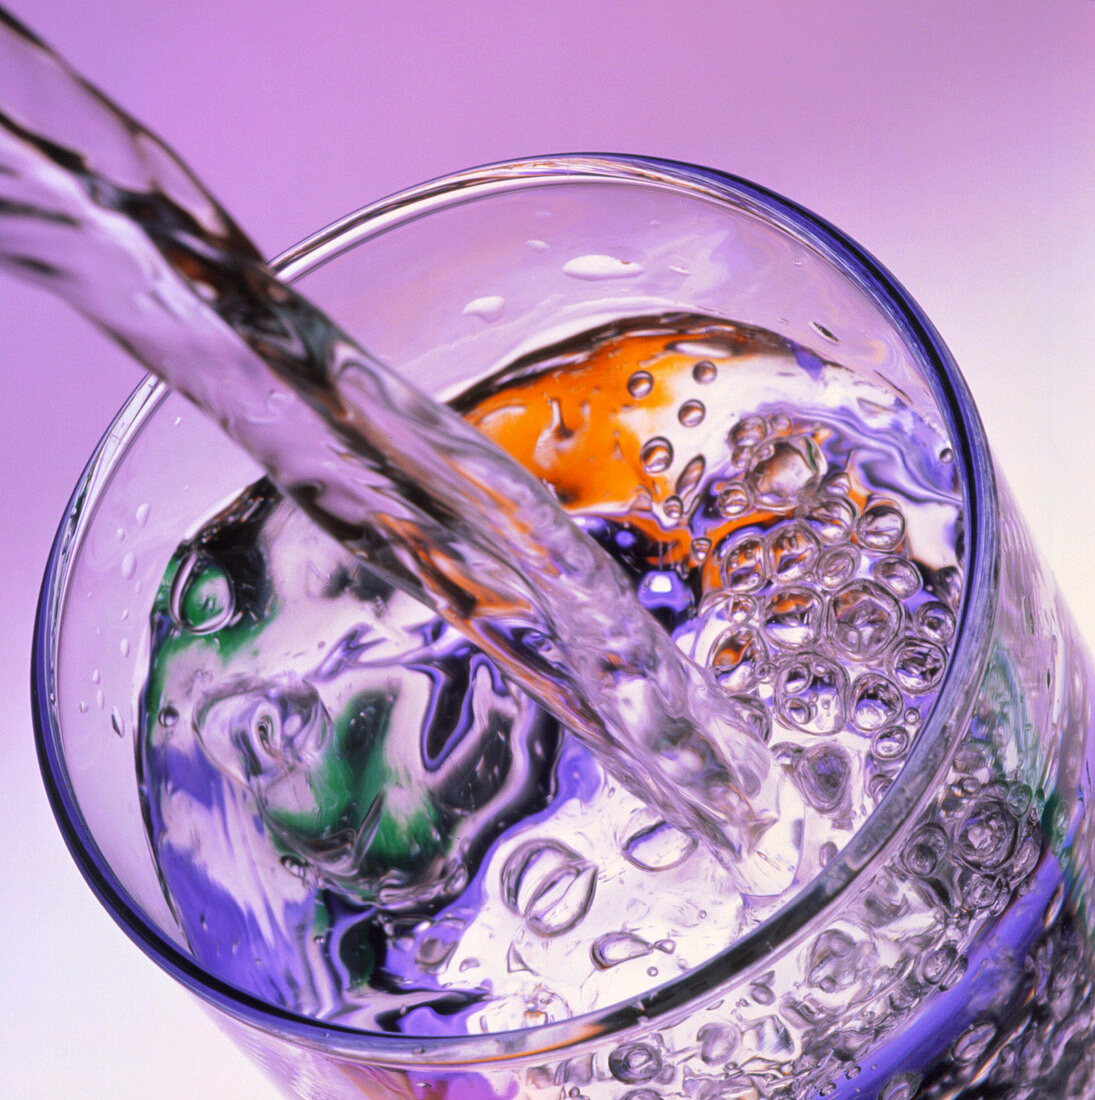 Water streaming into glass,mauve background